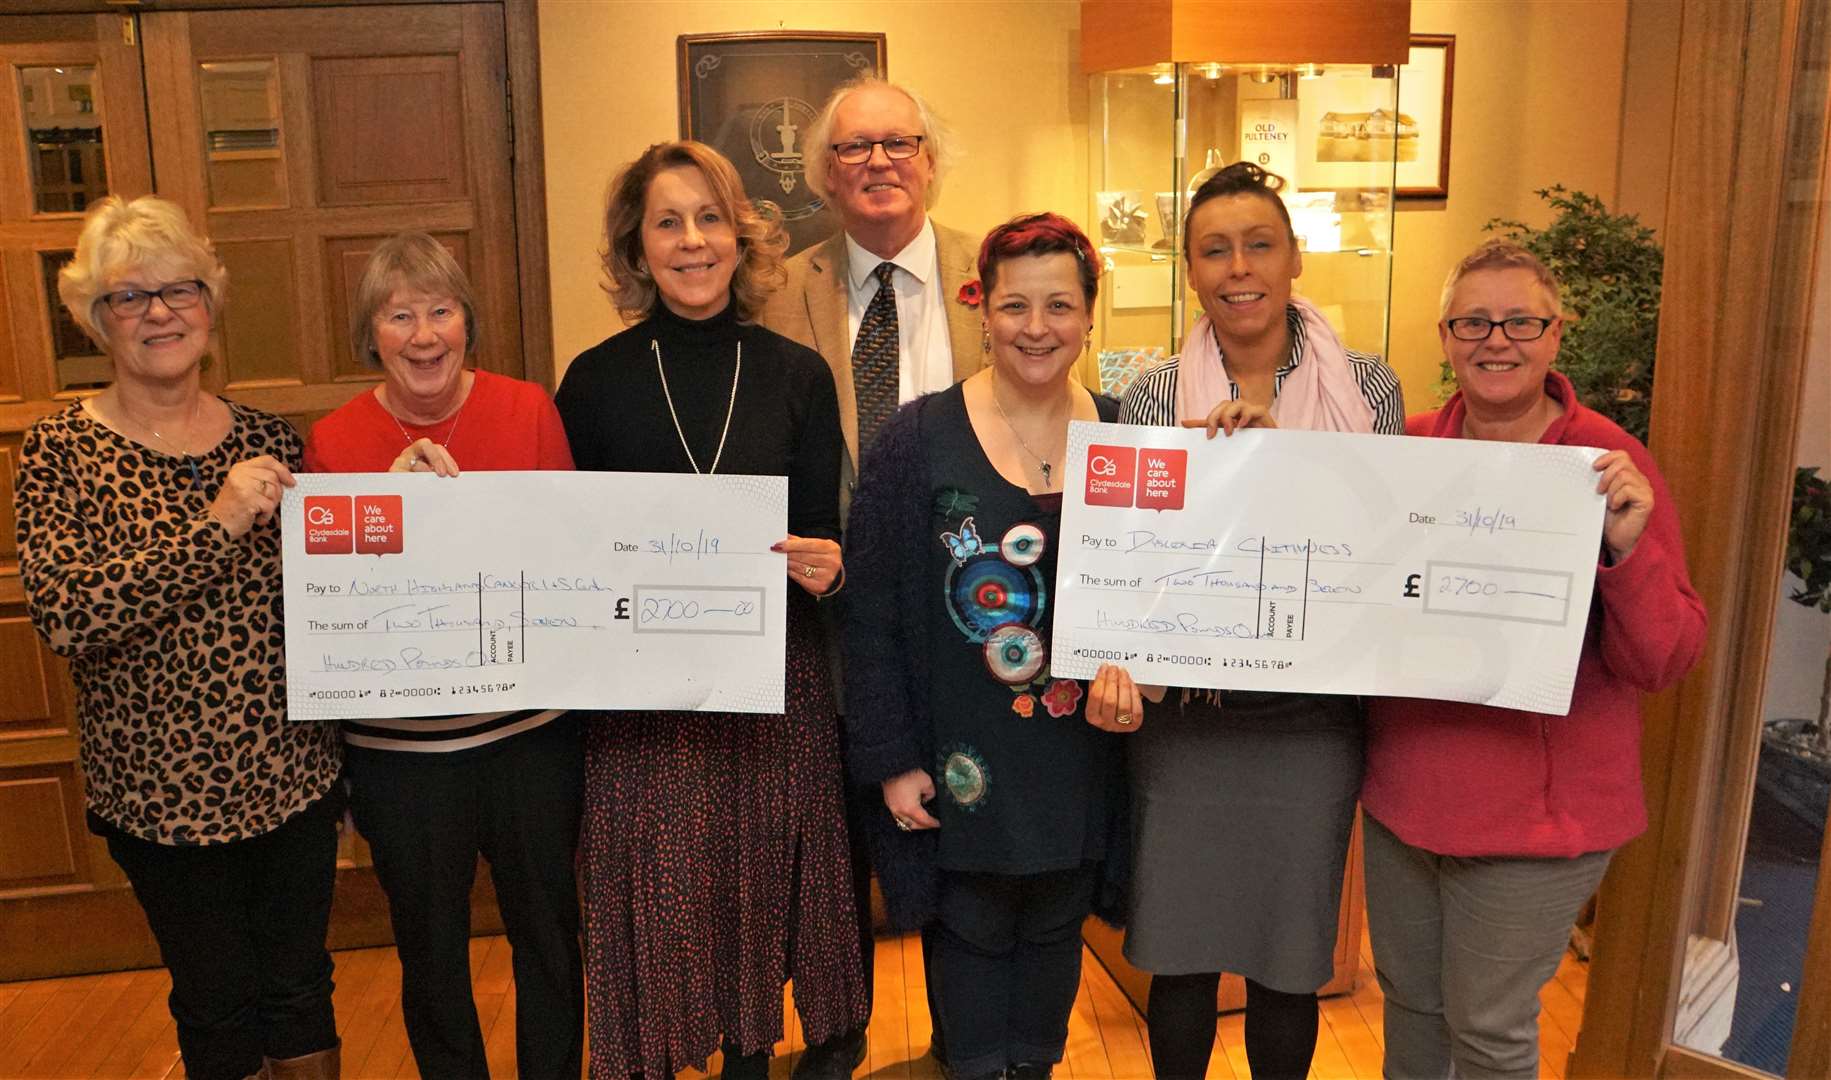 The handover of charity cheques at Mackays Hotel with (from left) Jean Dunnet and Barbara Cormack from the North Highland Cancer Information and Support Centre, Ellie Lamont and Murray Lamont from Mackays Hotel, Carole Darmady from Dyslexia Scotland Caithness branch, Jennifer Lamont from Mackays, and Carole Price from the dyslexia charity. Picture: DGS